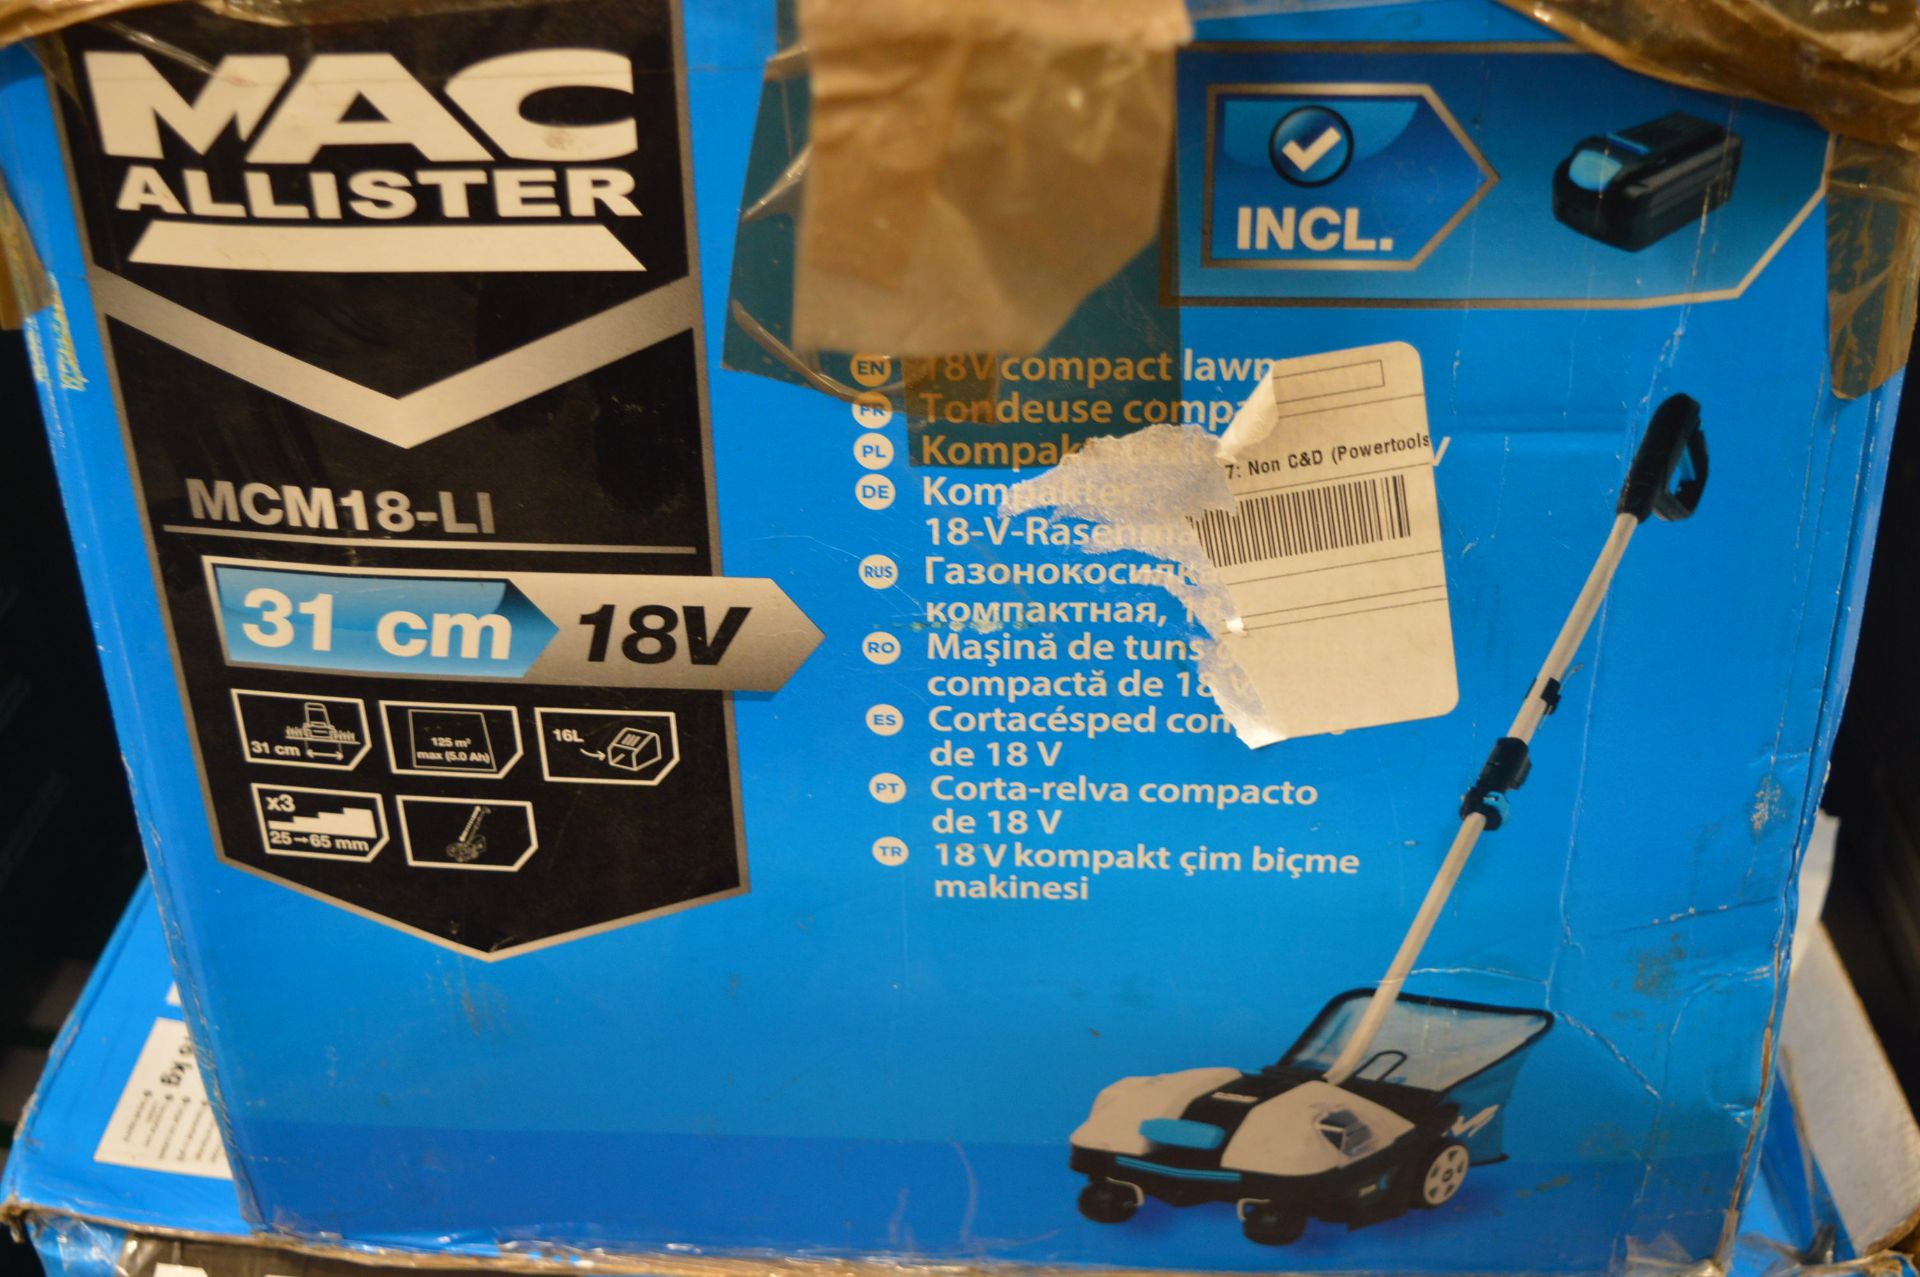 *Mac Allister 31cm Compact Lawnmower, and a 40cm T